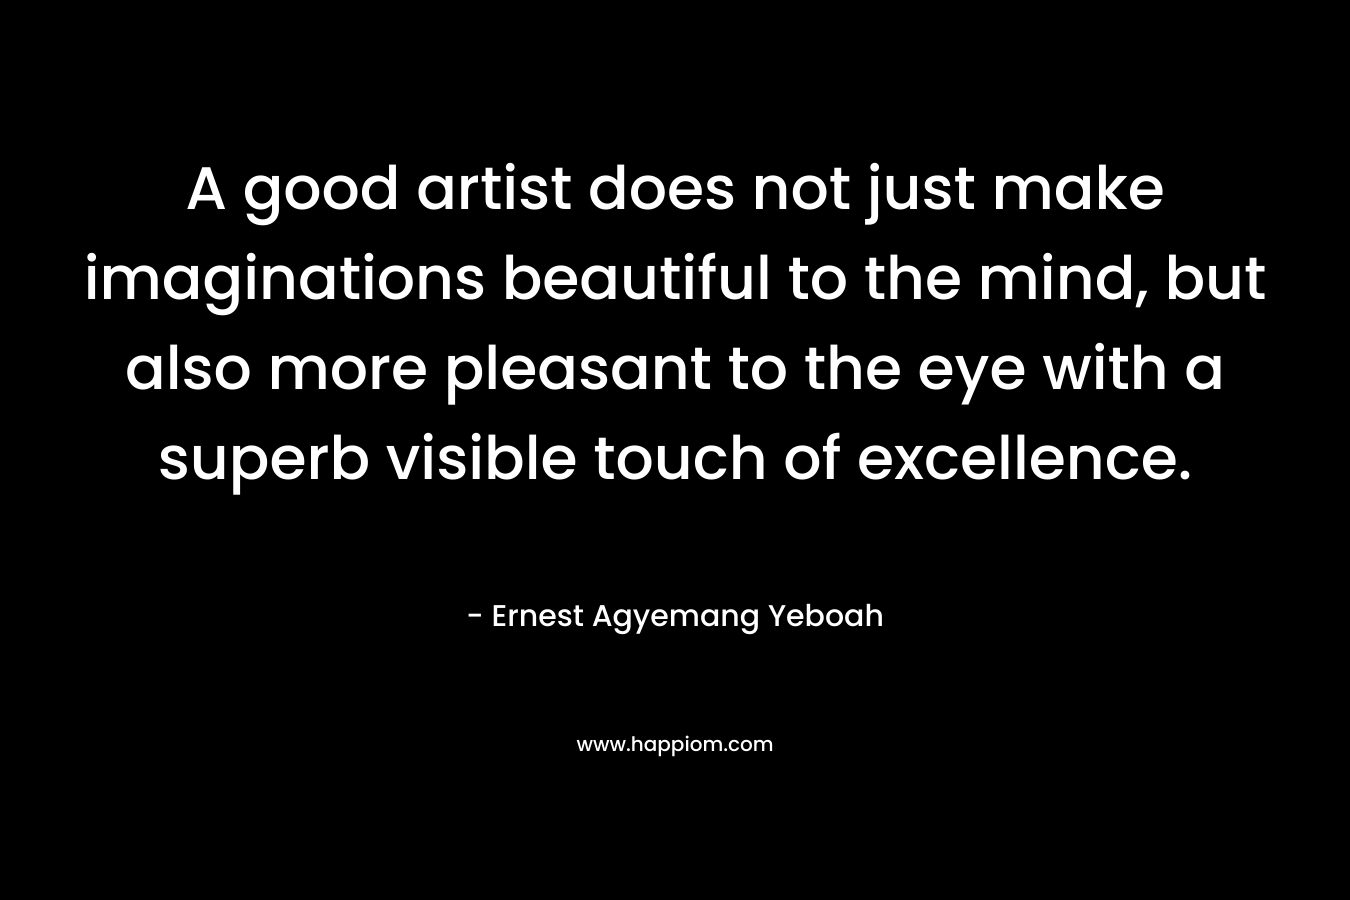 A good artist does not just make imaginations beautiful to the mind, but also more pleasant to the eye with a superb visible touch of excellence. – Ernest Agyemang Yeboah